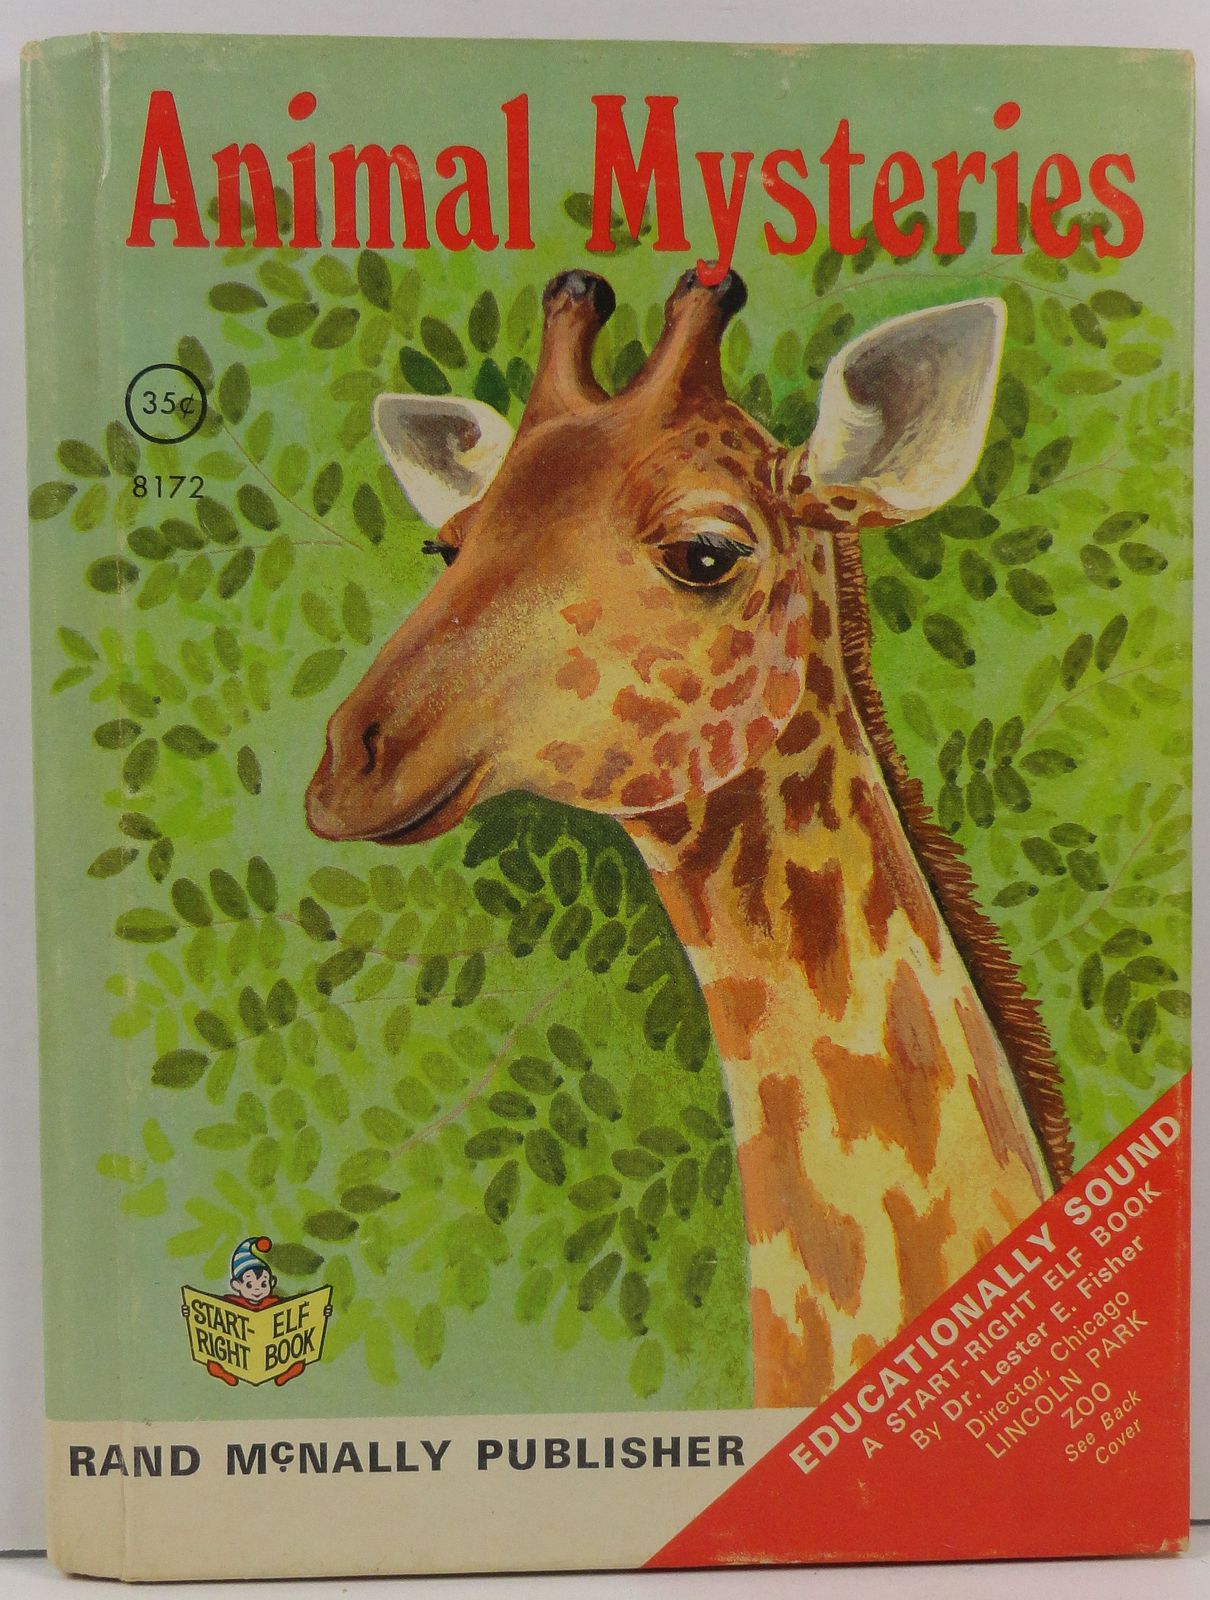 Animal Mysteries by Dr. Lester E. Fisher Start Right Elf Book - $3.99